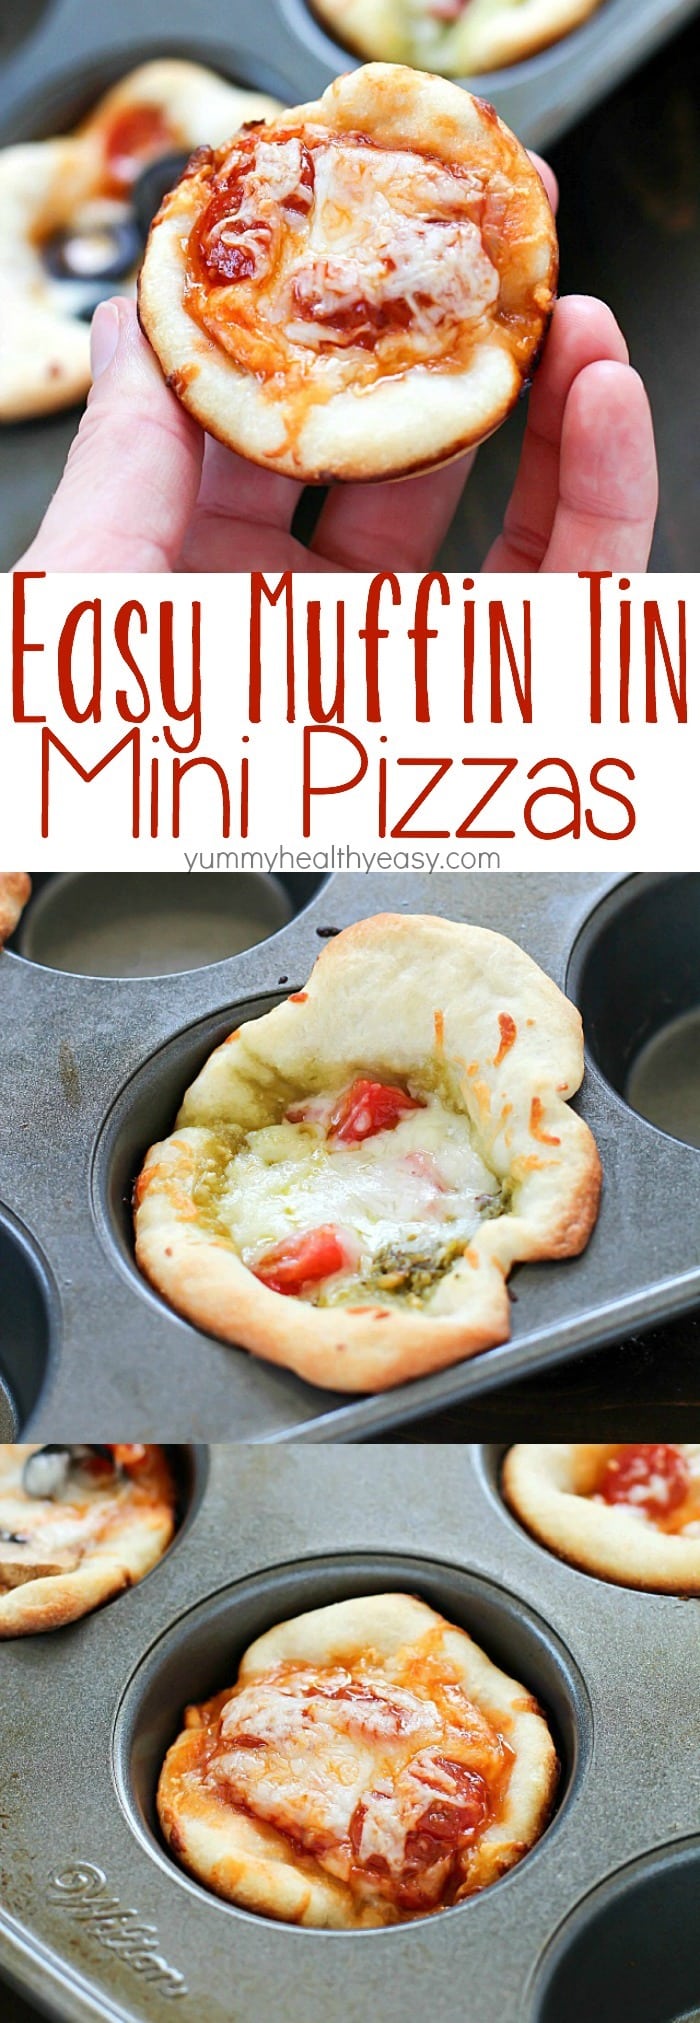 Dinner doesn't get easier than this: Easy Muffin Tin Mini Pizzas! They're ready in about 20 minutes and are customizable to what you like. Kids love these and love to help make them!